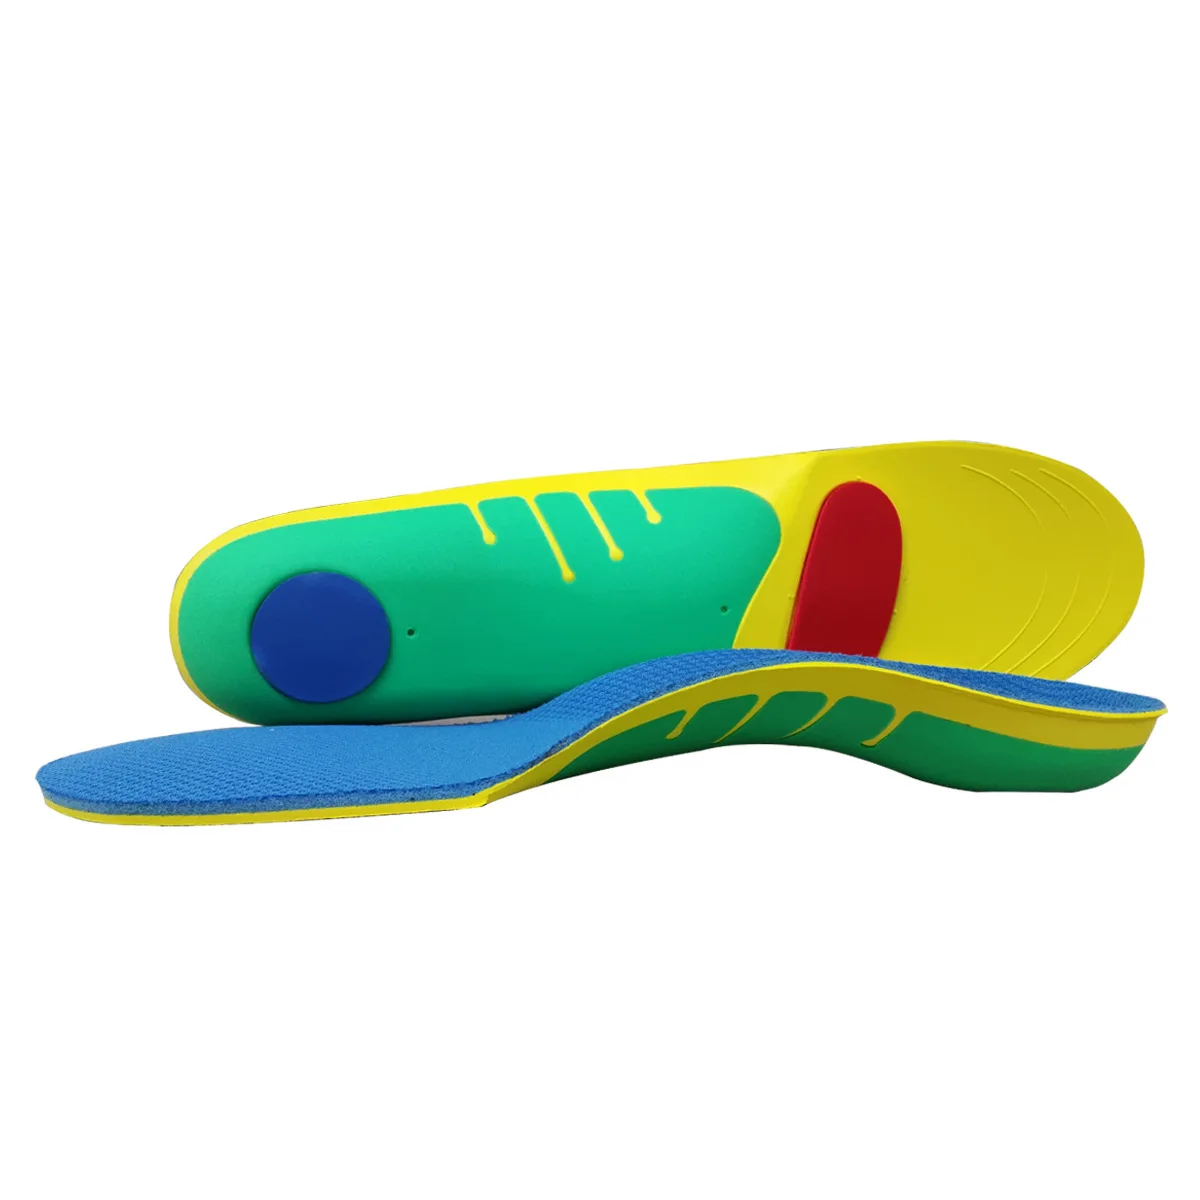 Men's and Women's Non-slip Orthopedic Insole Sports Shock-absorbing Insole Foot Care Health Care Orthopedic Leisure Insole